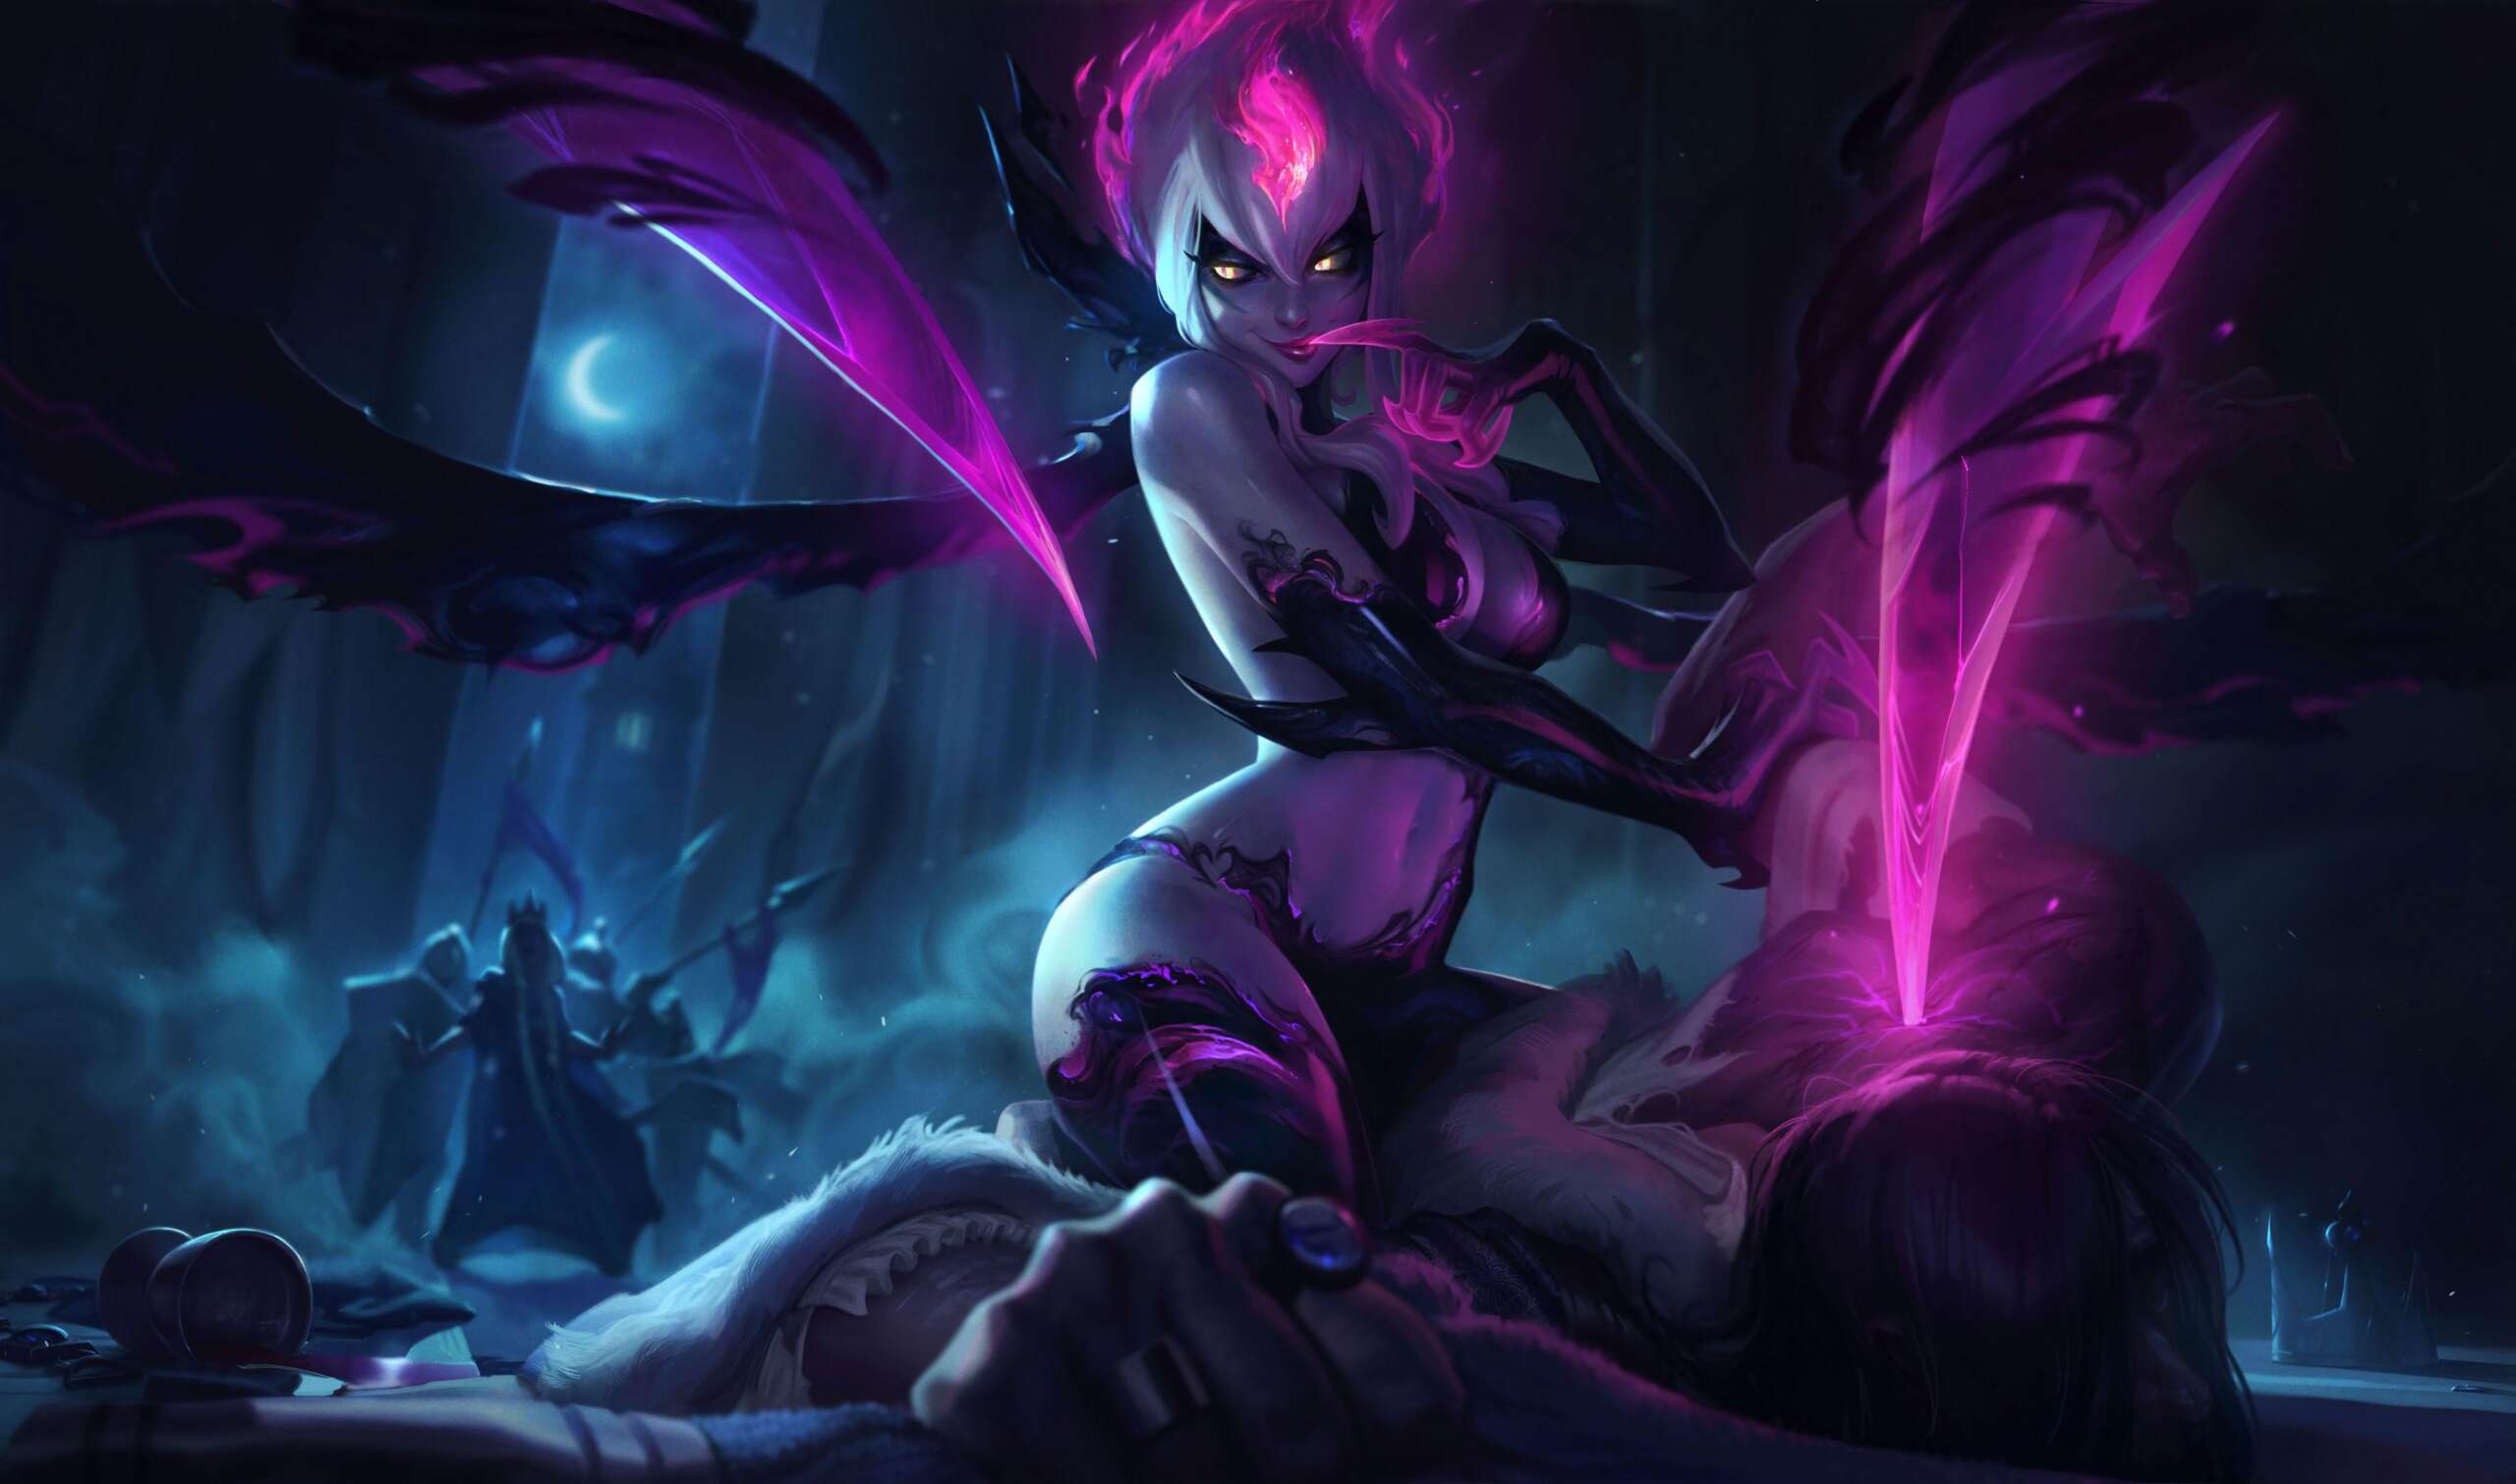 League Of Legends Evelynn’s K/DA All Out Skin Won’t Have Long Hair As Advertised Due To Rig Limitations